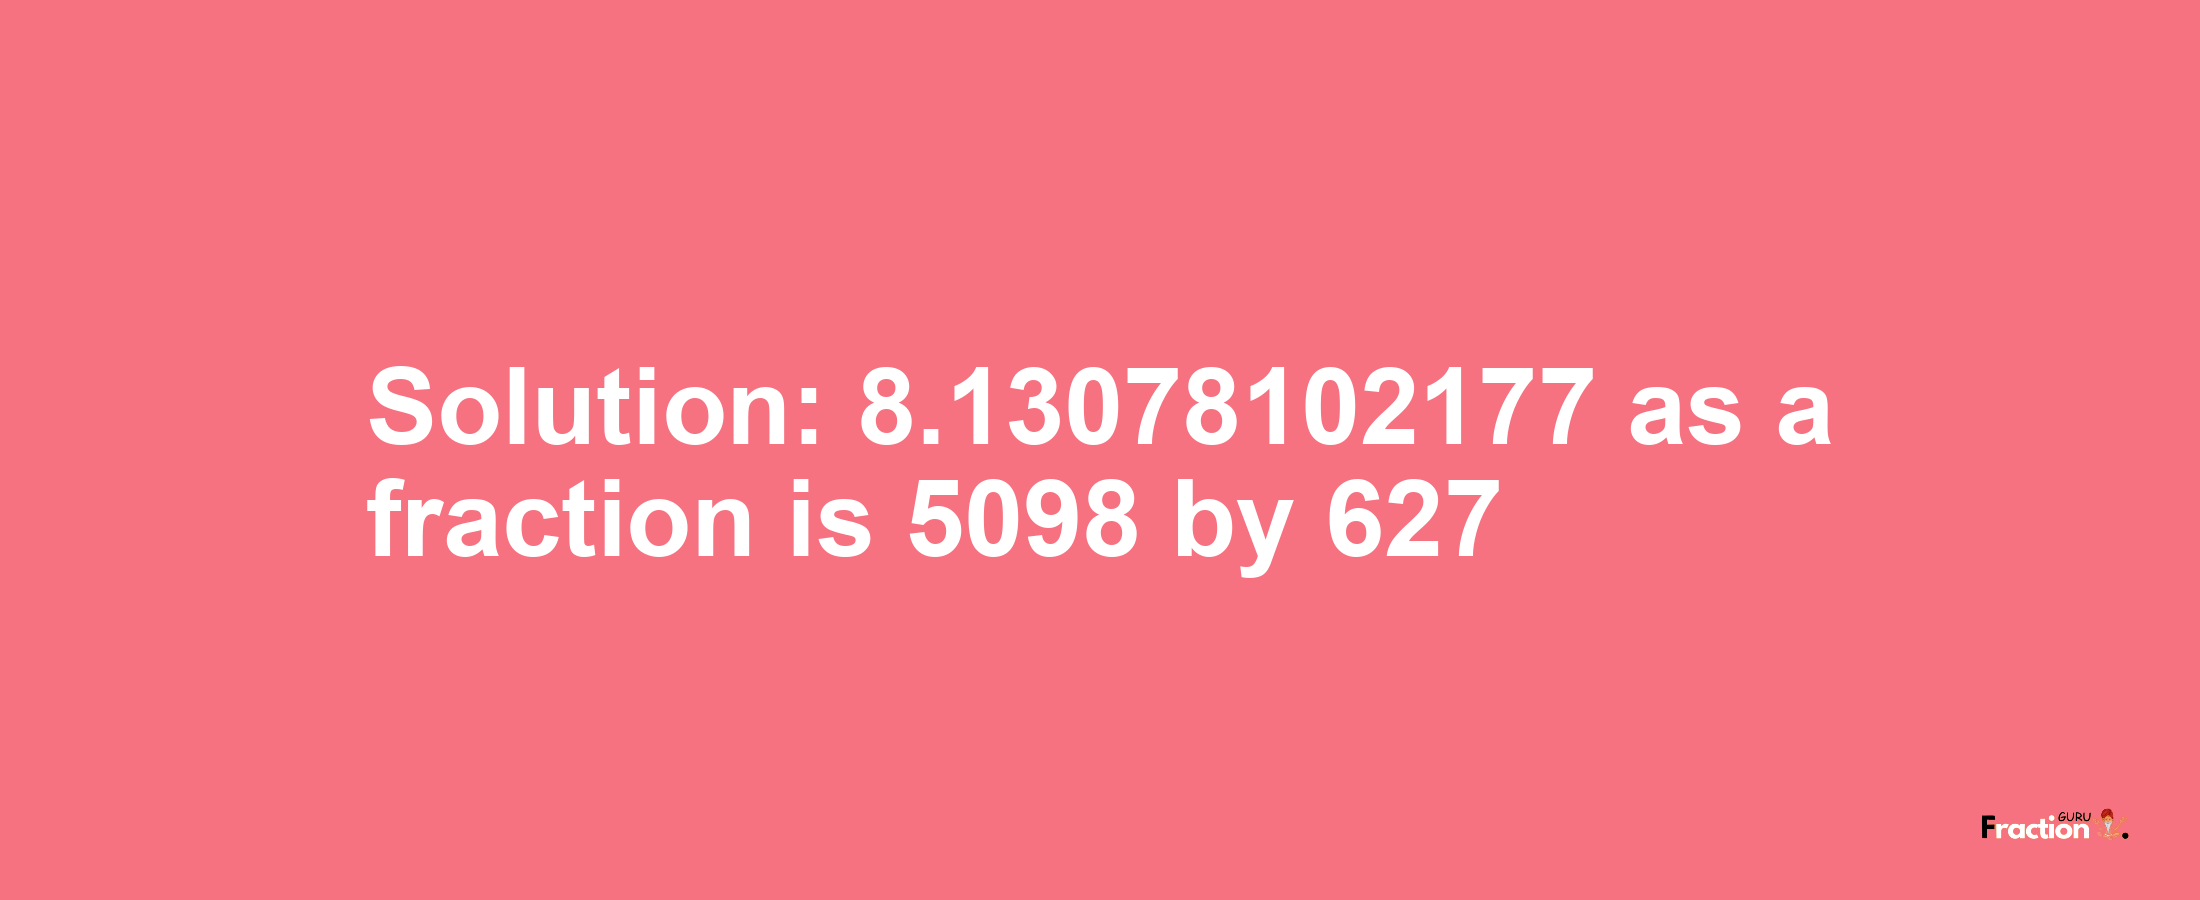 Solution:8.13078102177 as a fraction is 5098/627